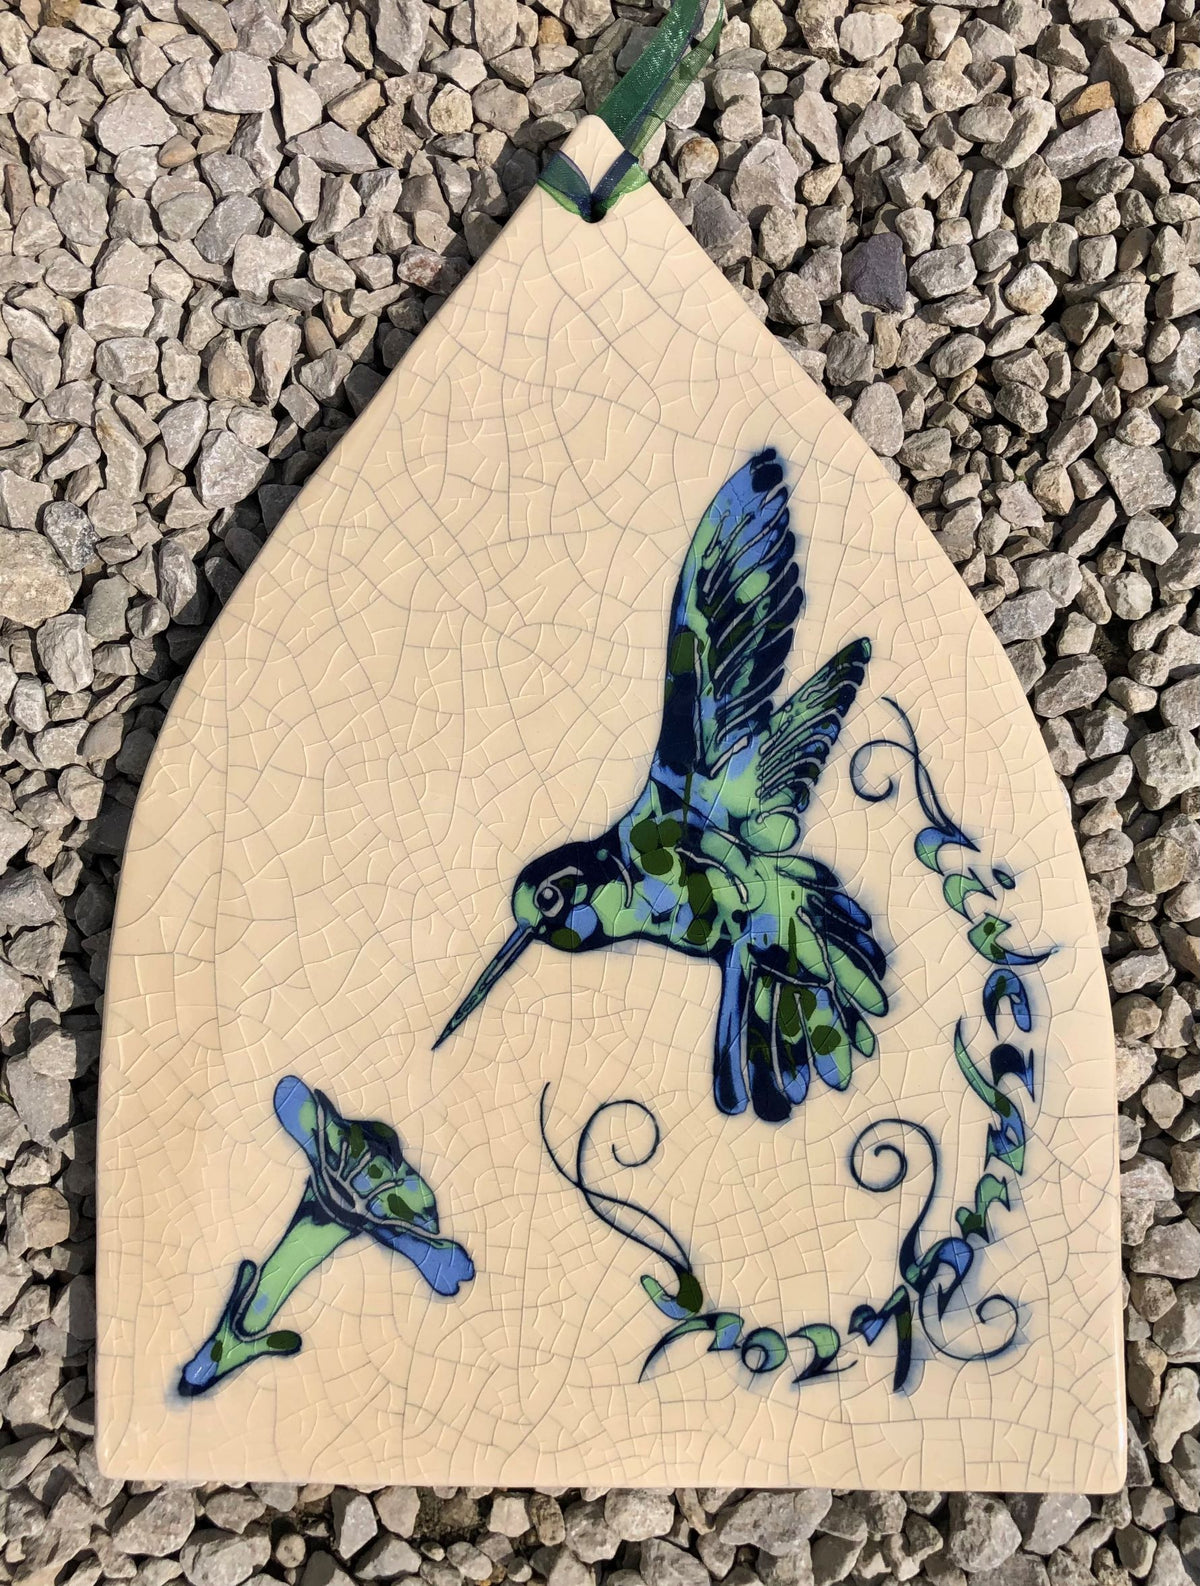 Arch ceramic tile with Hummingbird by Mel Chambers